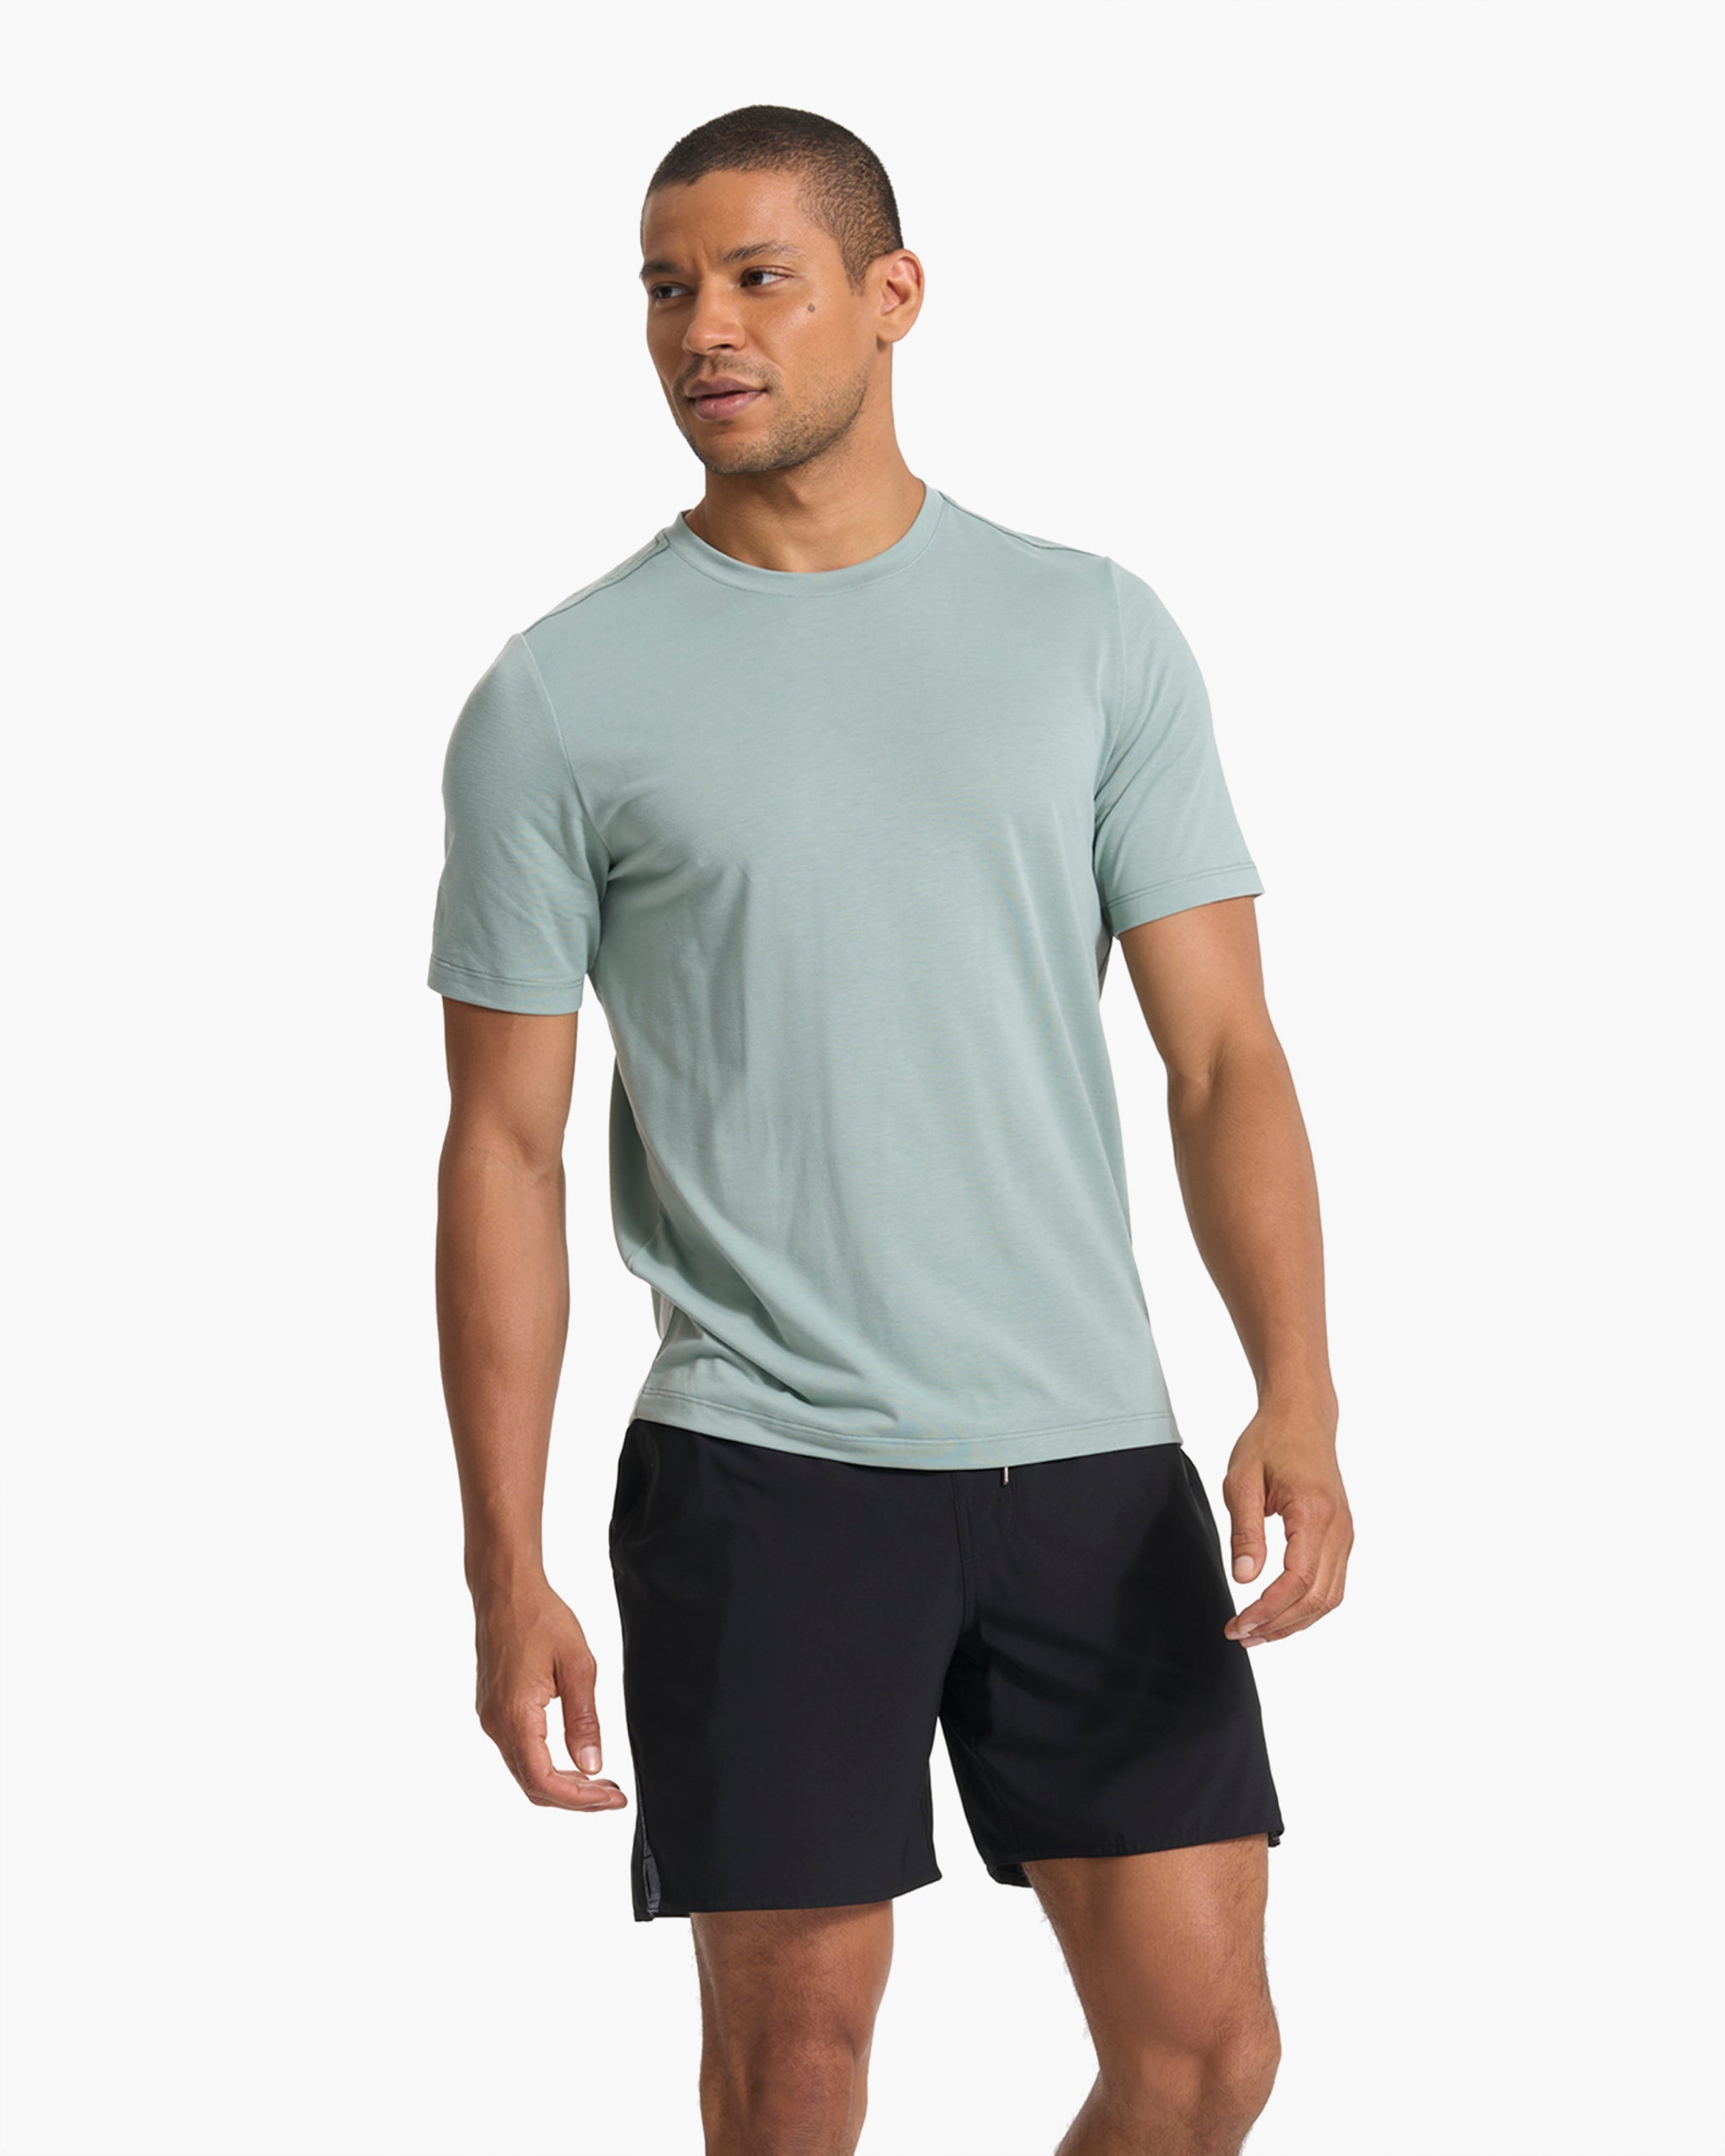 15 Best Workout Shirts for Men 2023 to Keep You Looking Sharp and